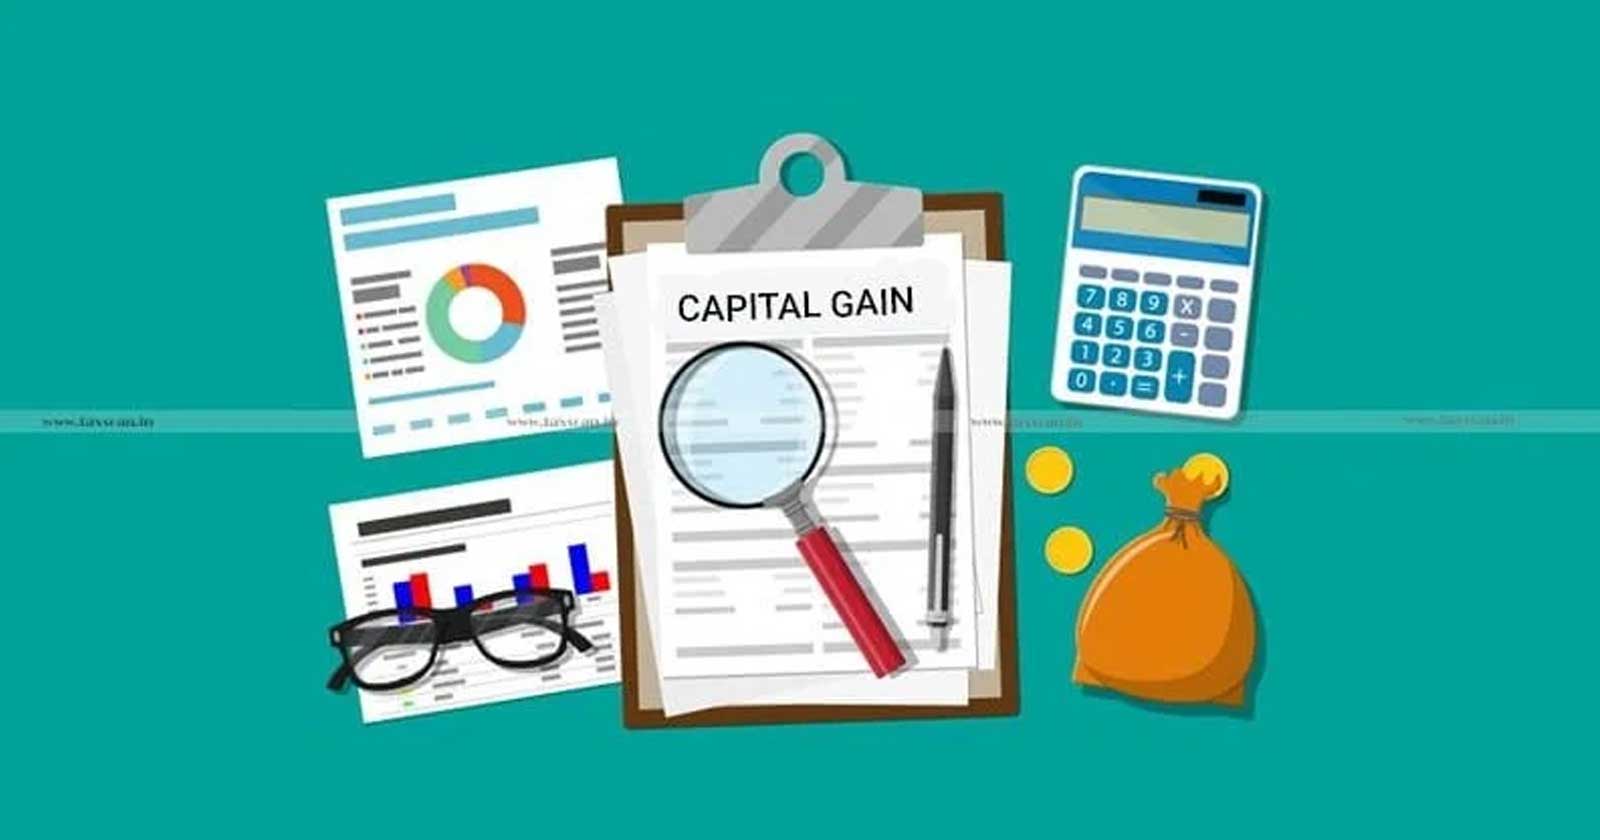 India-Mauritius DTAA on capital gains - Latest updates on India Mauritius DTAA - Delhi High Court decision on CCDs - Taxability and Capital Gains - Taxscan